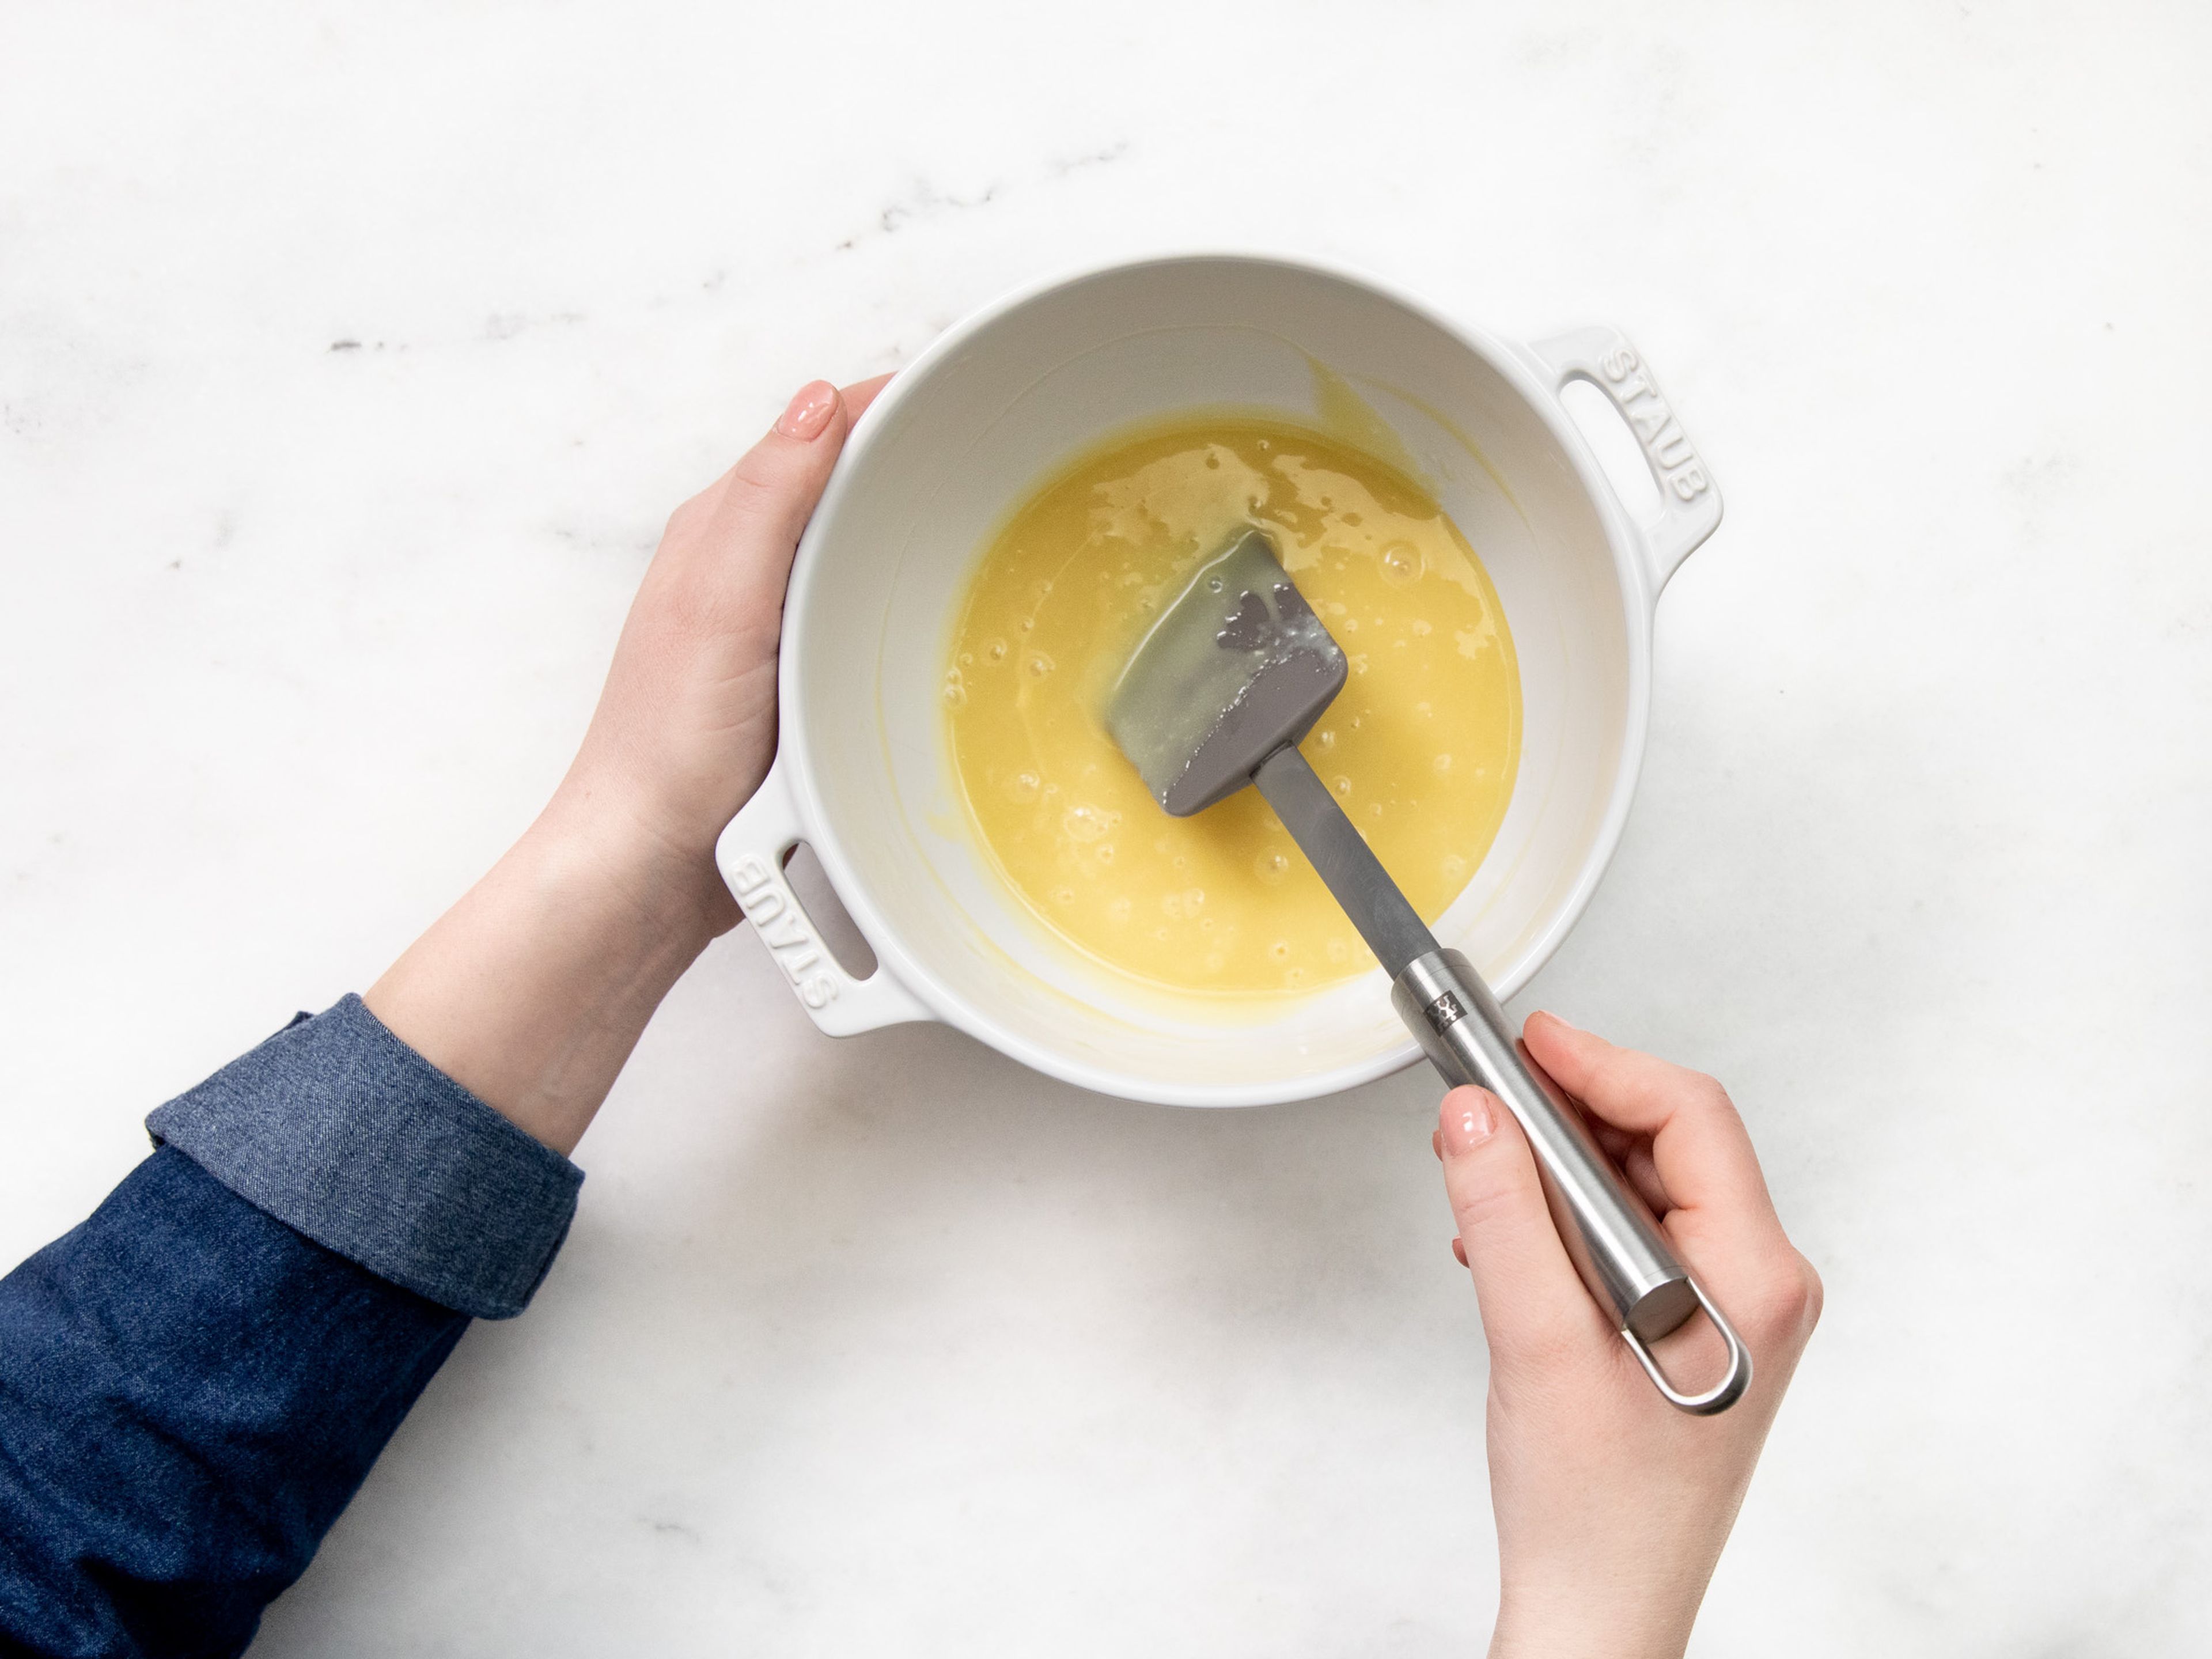 To prepare the frosting, add heavy cream to a saucepan and warm over medium-low heat. Chop white chocolate and add to a bowl and pour over the warmed heavy cream. Let sit for approx. 5 min., then stir to combine until chocolate is melted and smooth. Let the mixture cool for approx. 1 hr.